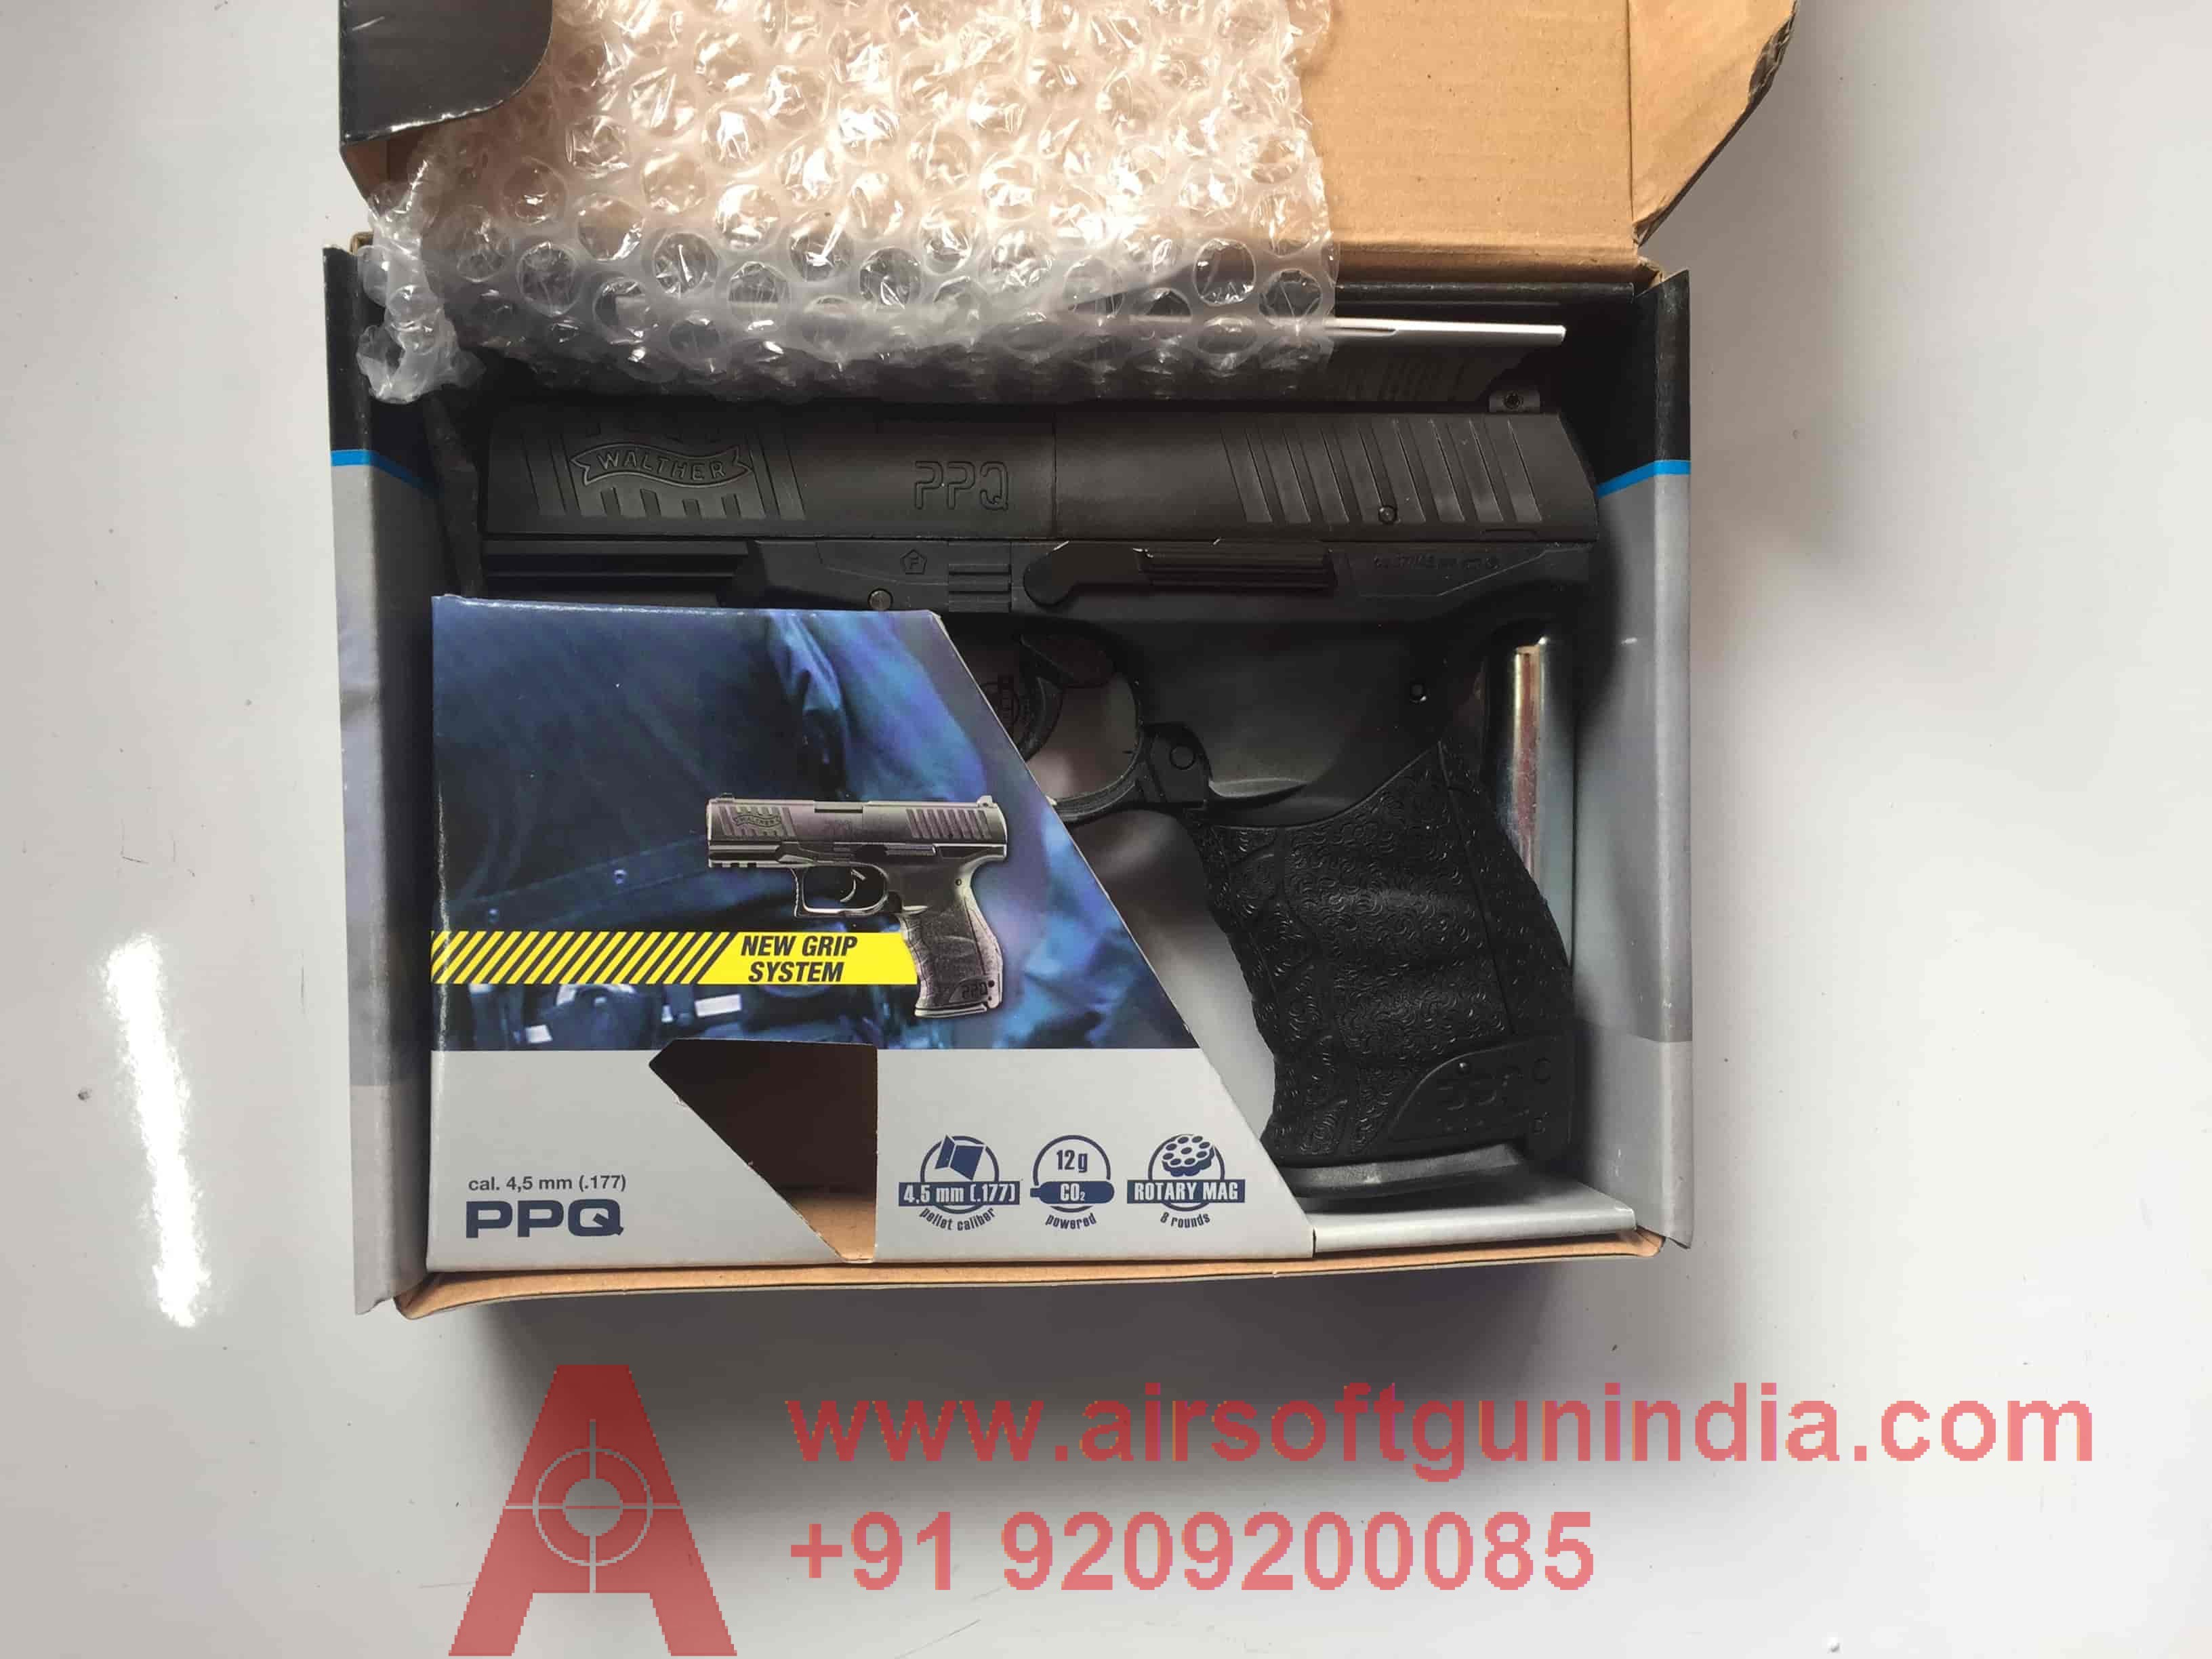 Walther PPQ / P99 Q CO2 AIR PISTOL IN INDIA By Airsoft Gun India